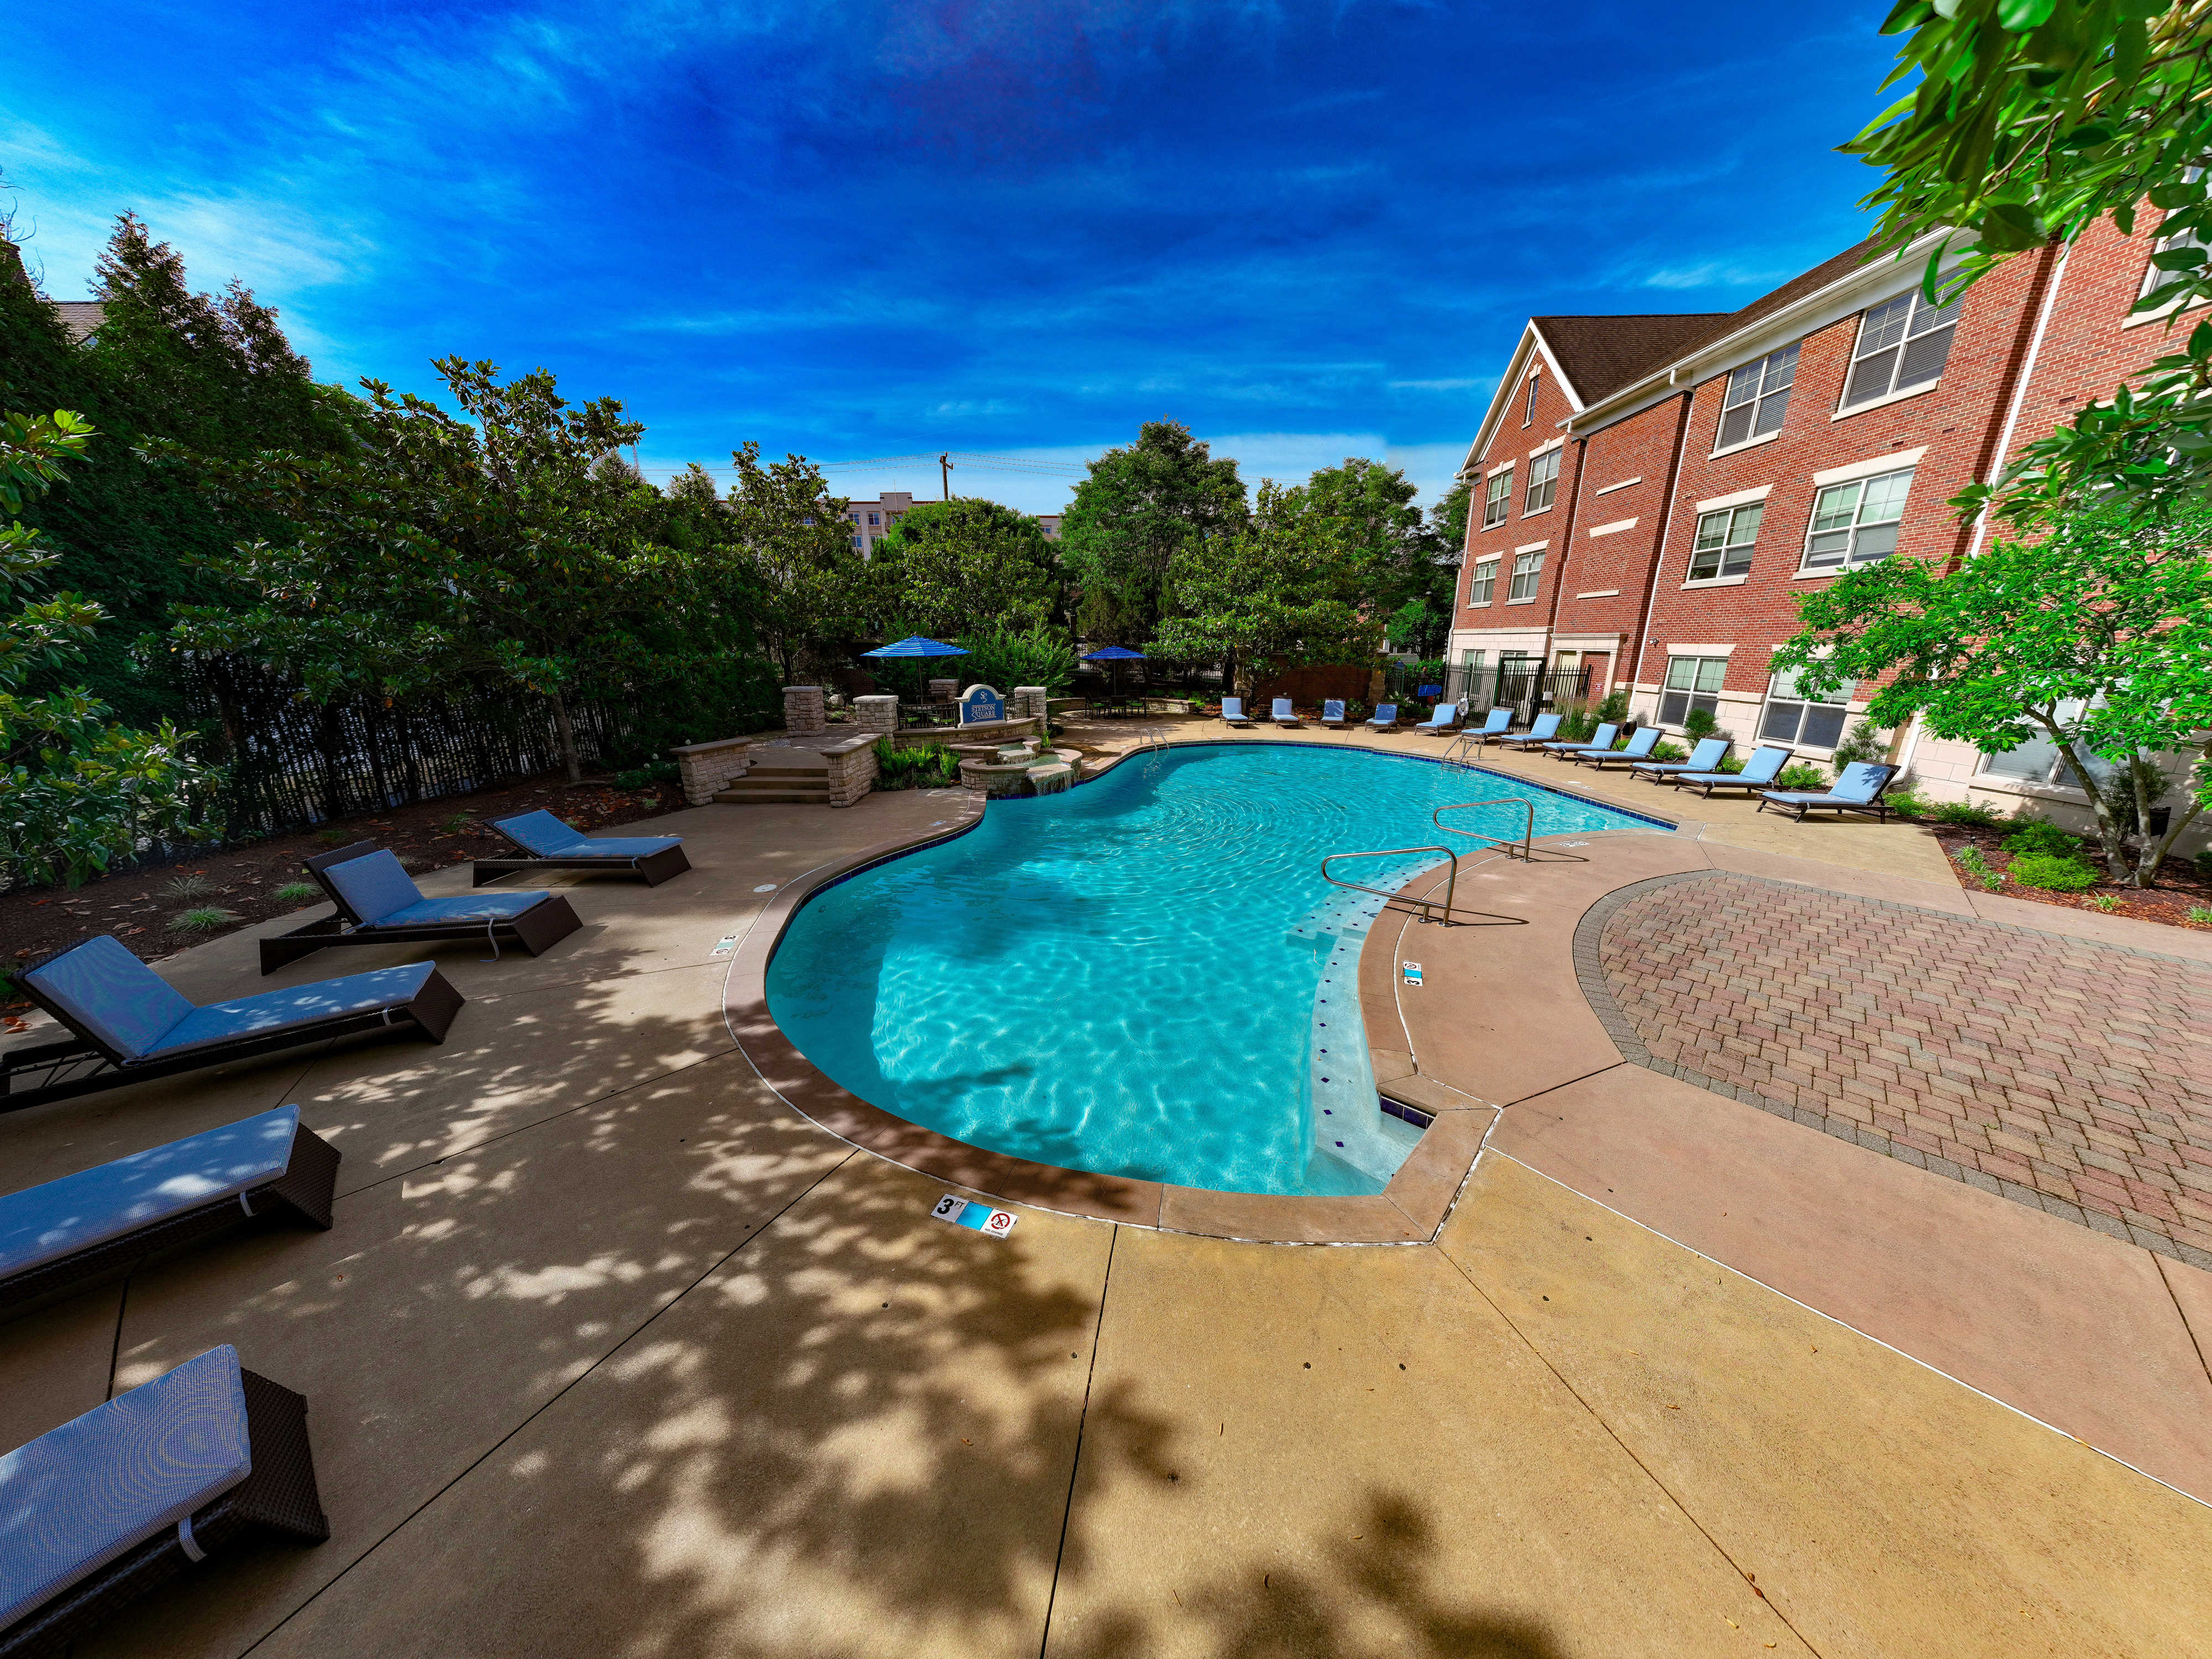 Swimming pool and lounge chairs at The Village at Stetson Square in Cincinnati, Ohio